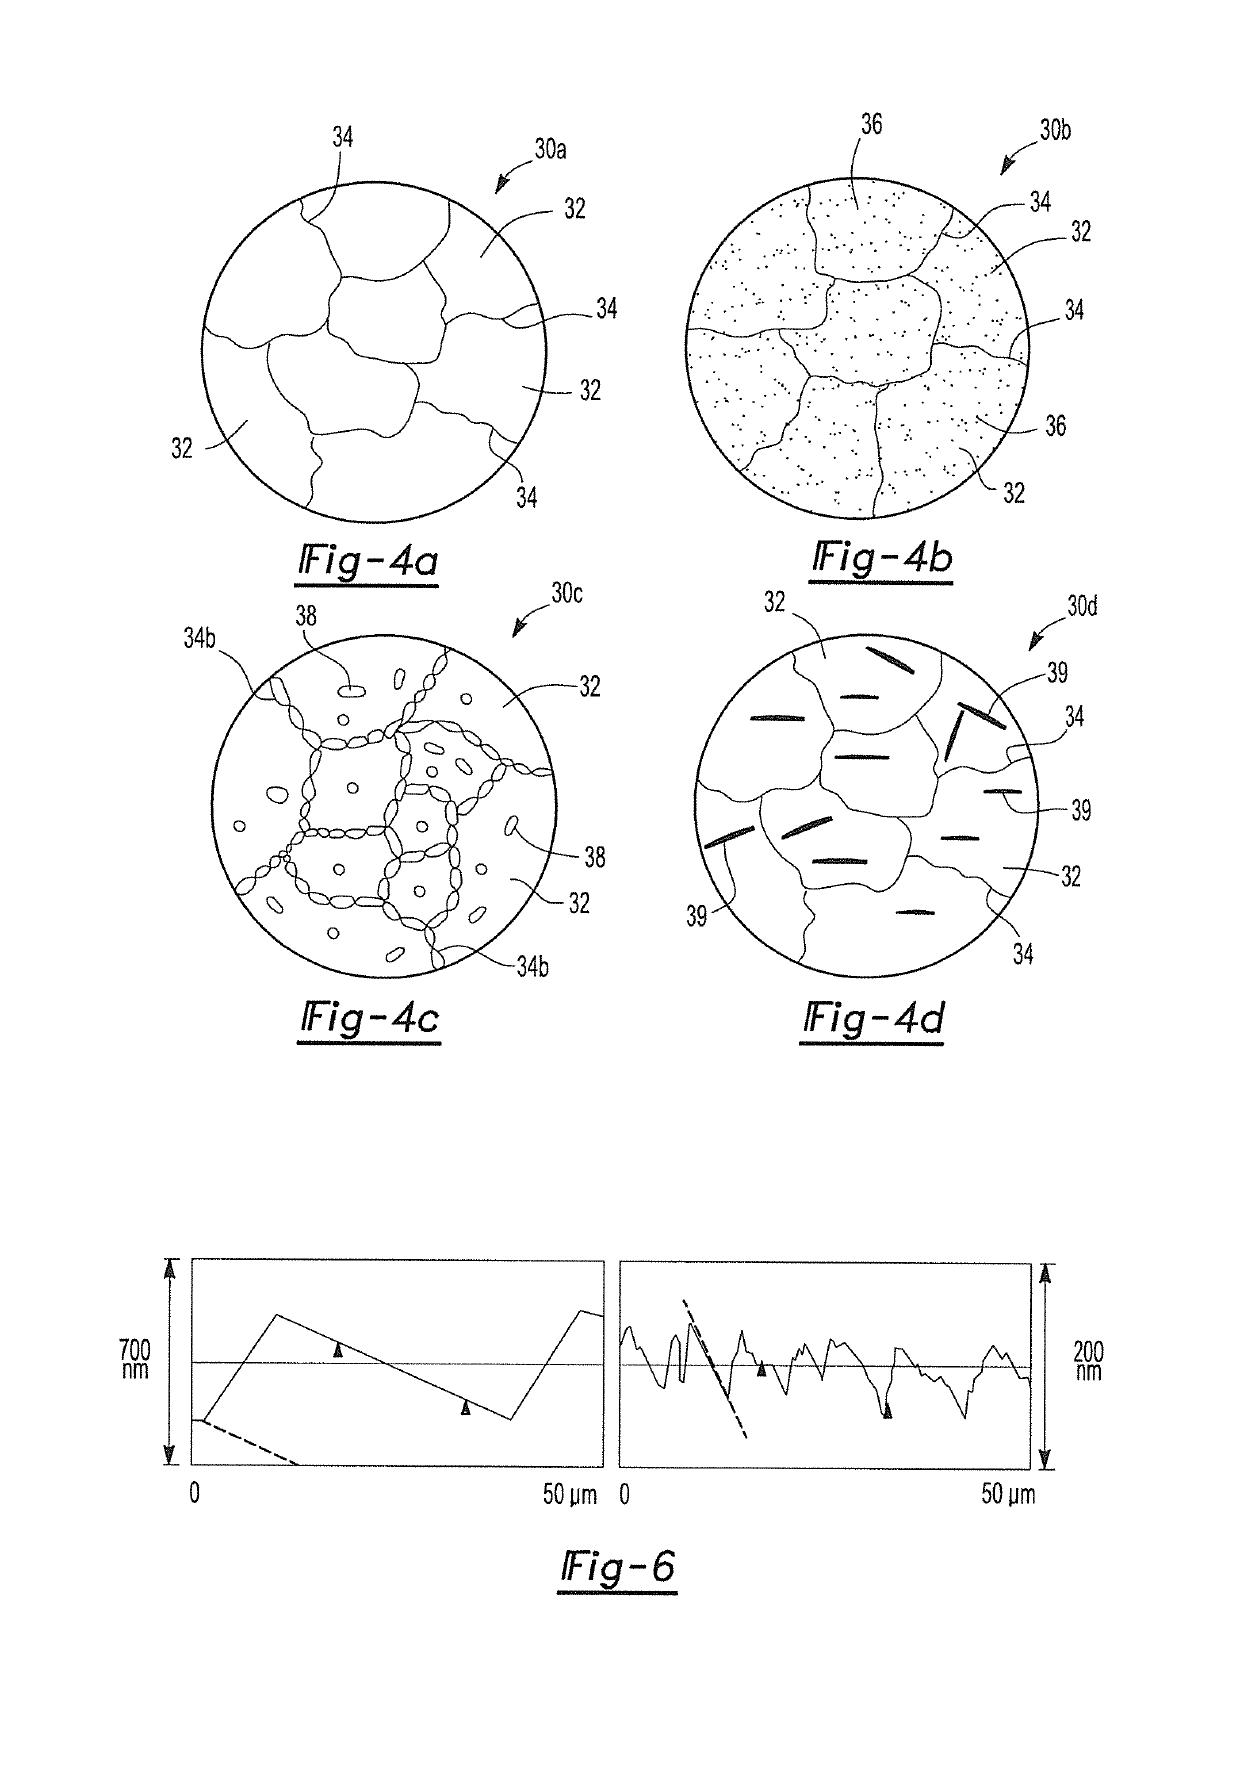 Process for design and manufacture of cavitation erosion resistant components